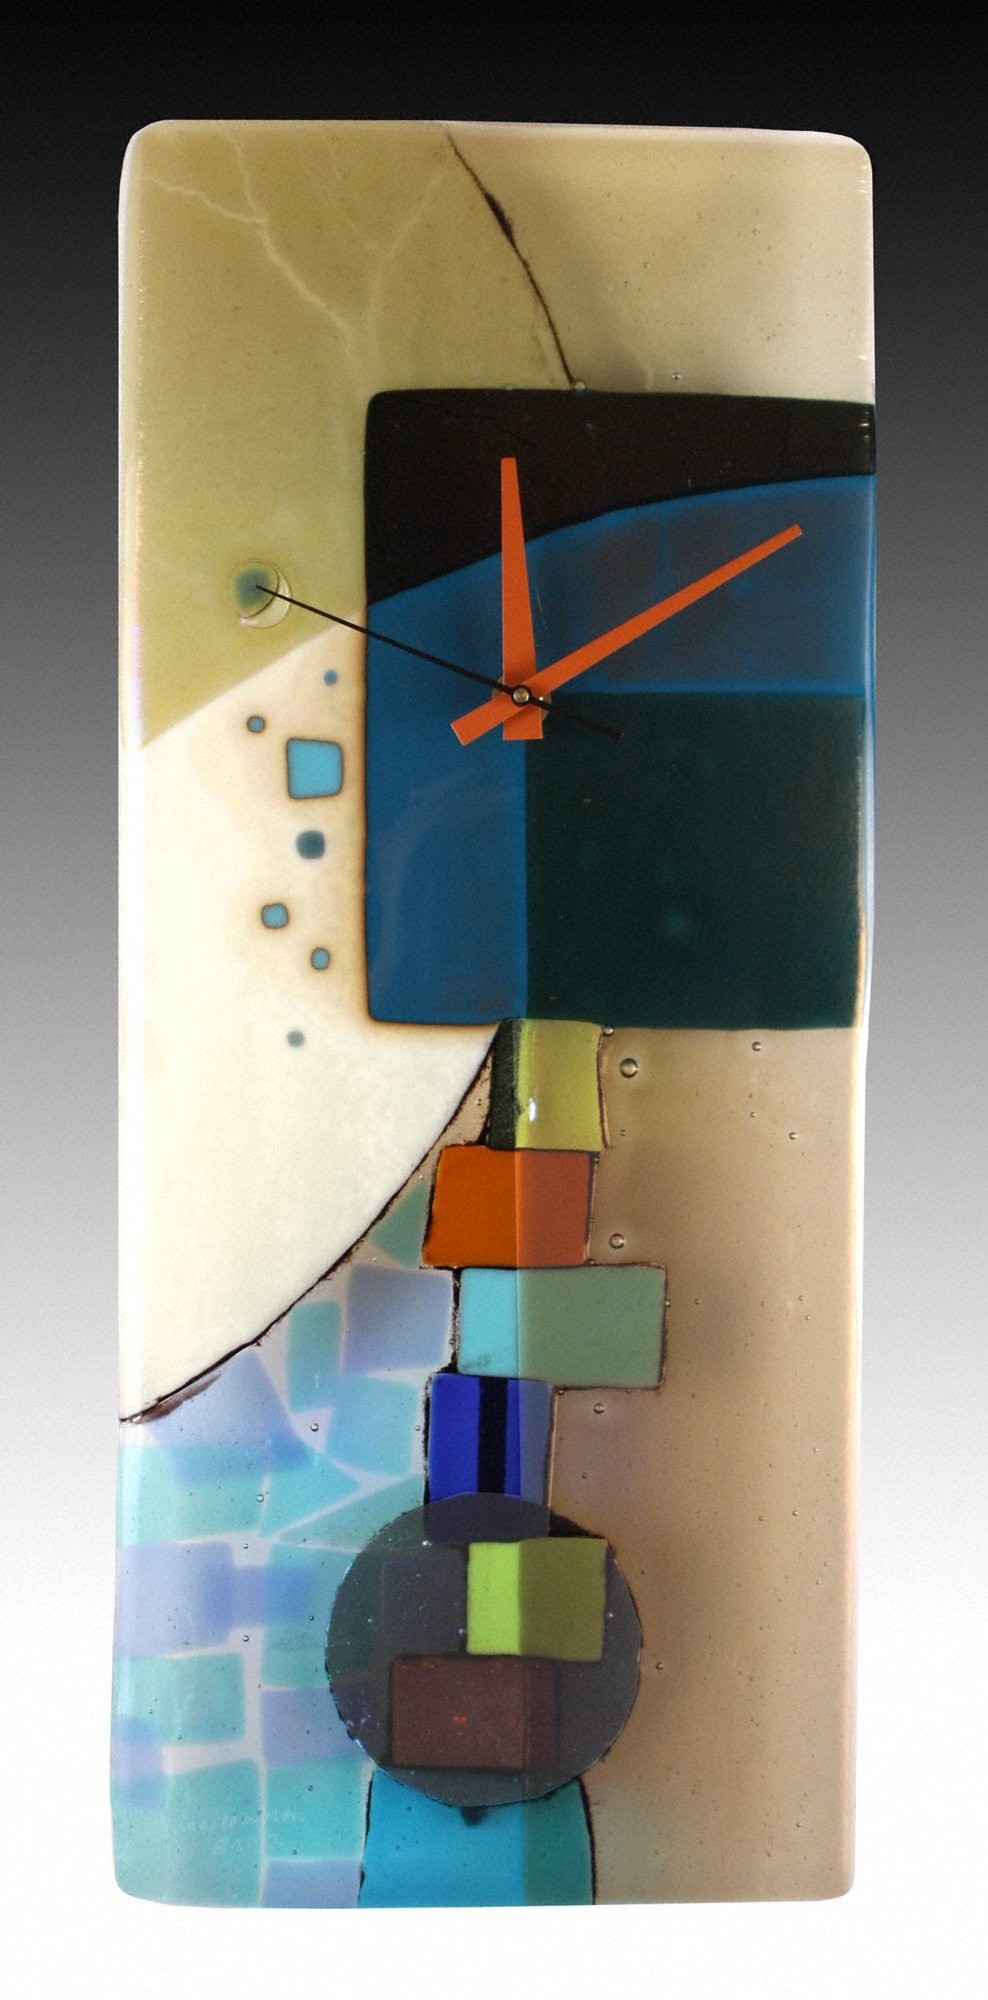 Stained glass clocks